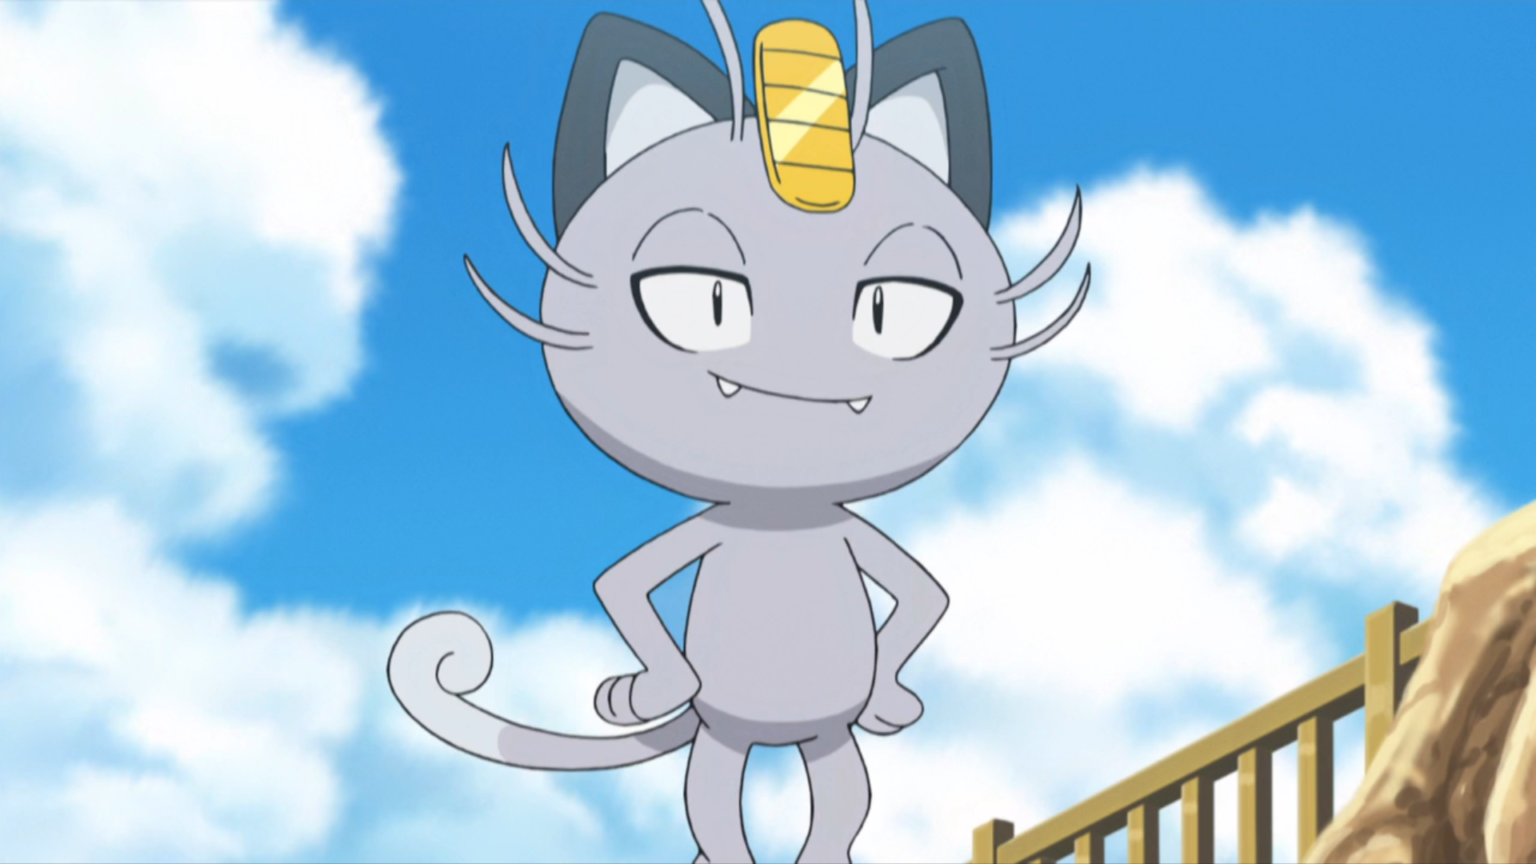 30 Fun And Interesting Facts About Meowth From Pokemon.